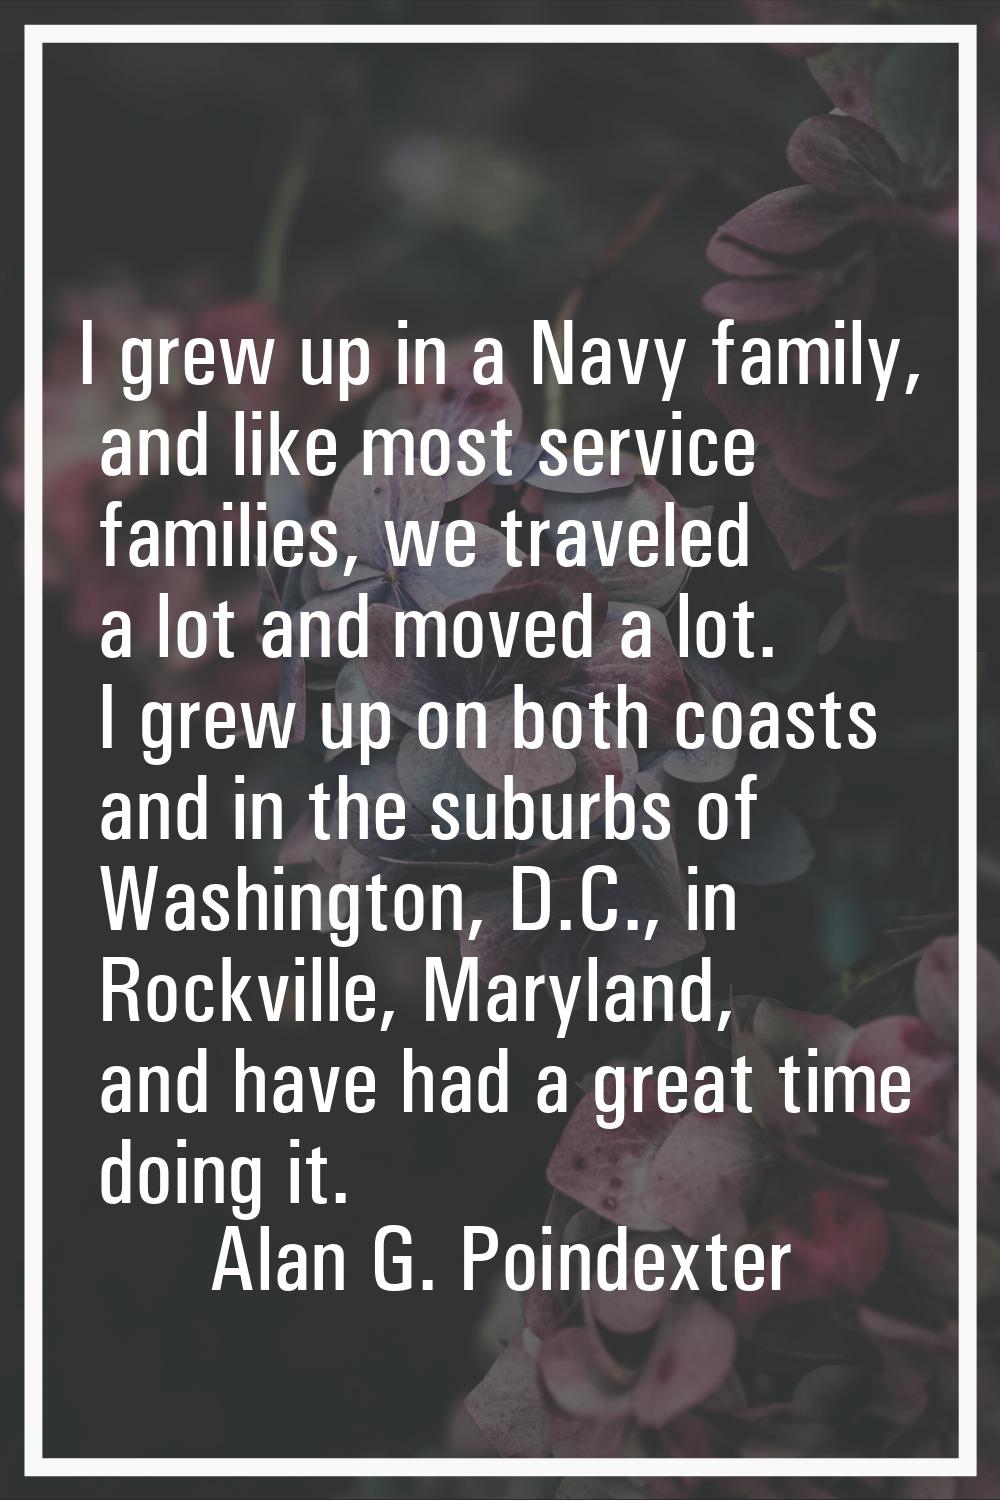 I grew up in a Navy family, and like most service families, we traveled a lot and moved a lot. I gr